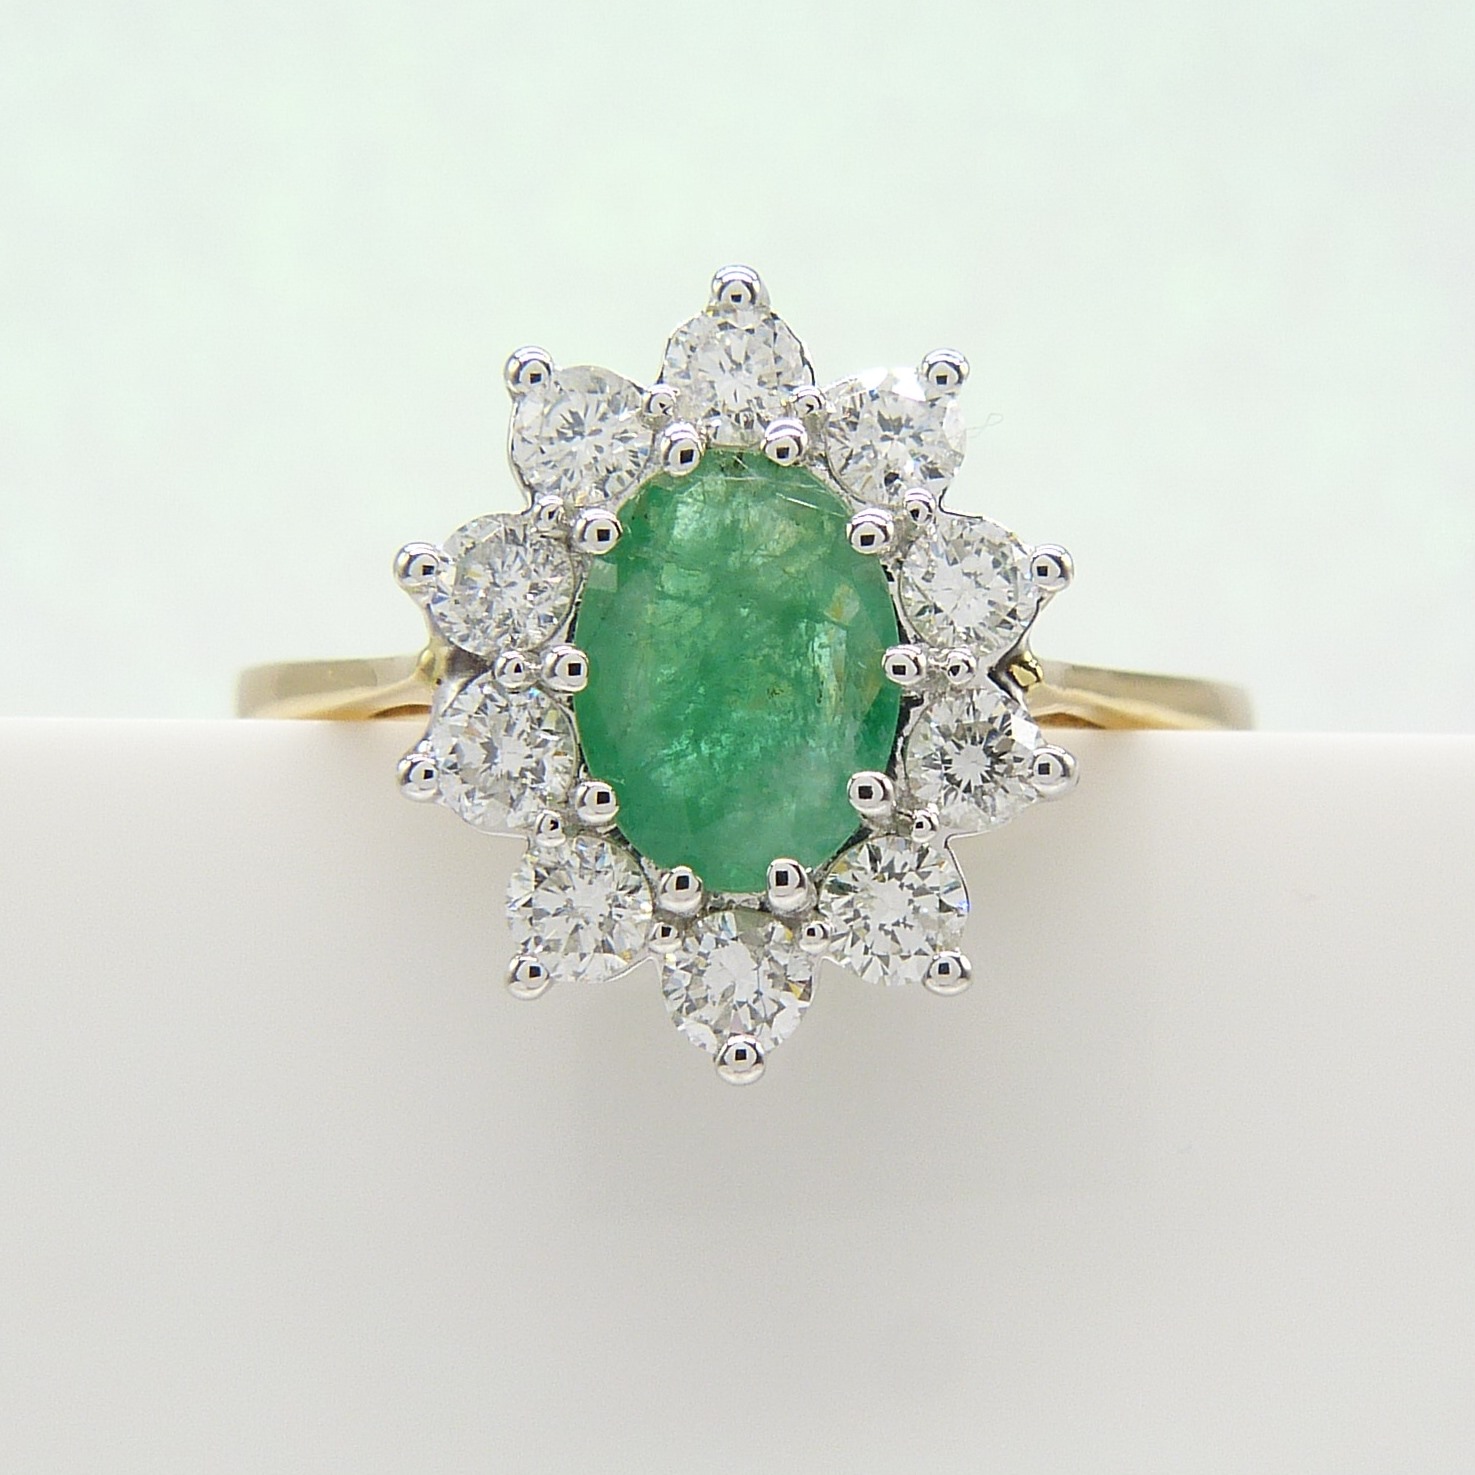 Certificated 18ct Yellow and White Gold Emerald and Diamond Cluster Ring - Image 4 of 7